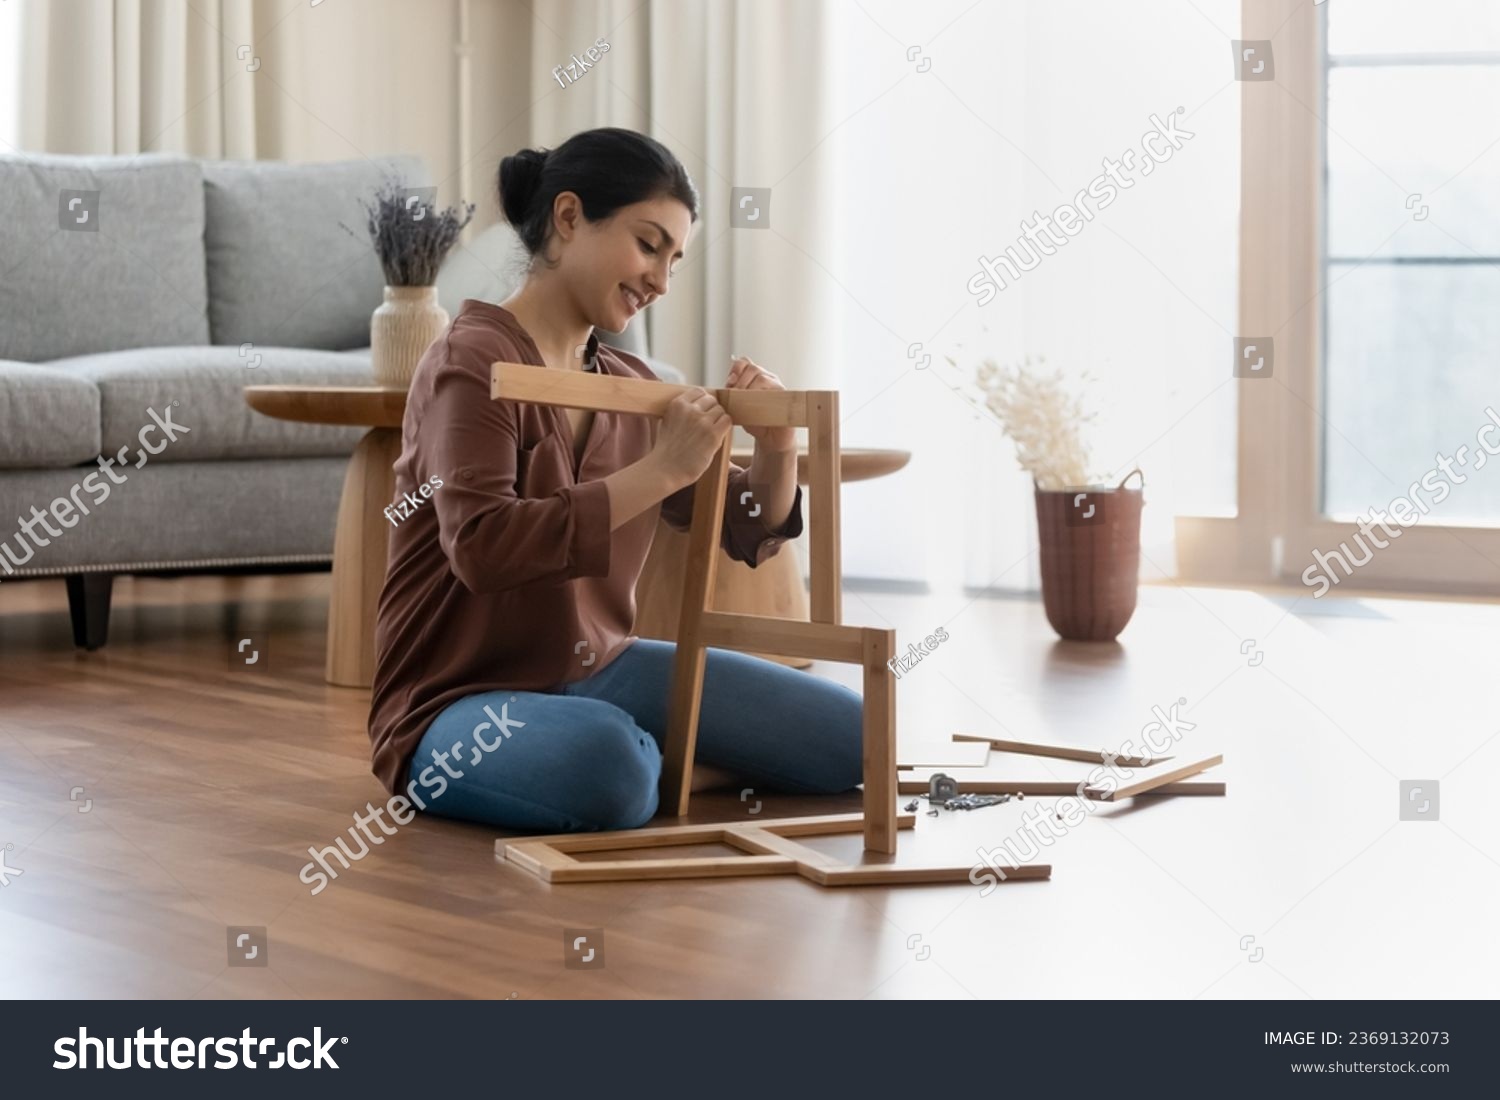 Smiling Indian woman assembling new wooden furniture, sitting on floor in living room at home, happy young female renter customer putting wooden shelf or chair pieces together, renovation concept #2369132073